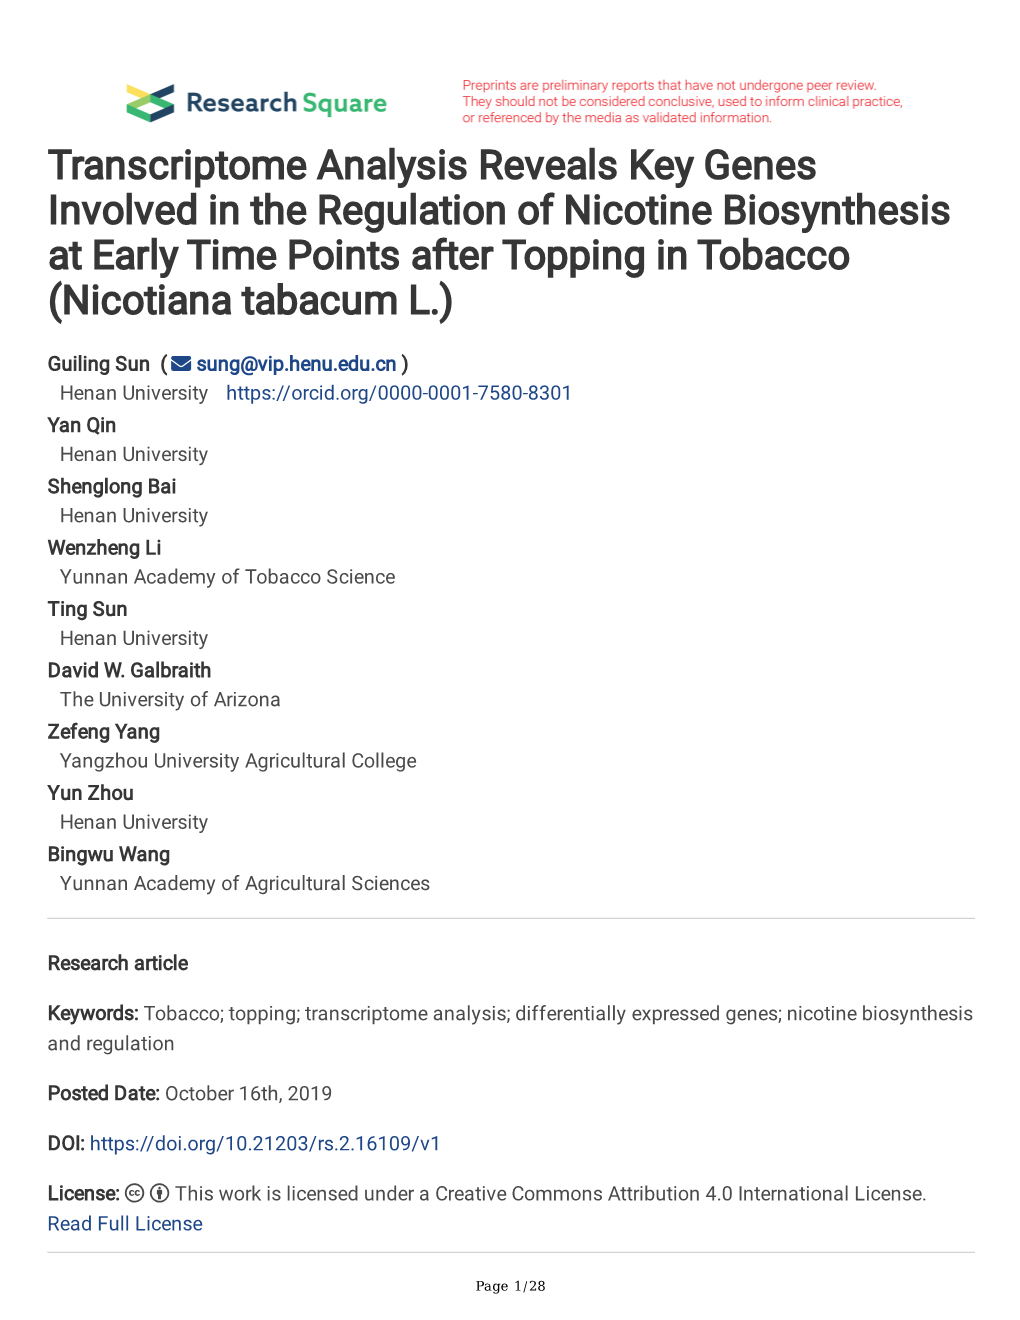 Transcriptome Analysis Reveals Key Genes Involved in the Regulation of Nicotine Biosynthesis at Early Time Points After Topping in Tobacco (Nicotiana Tabacum L.)